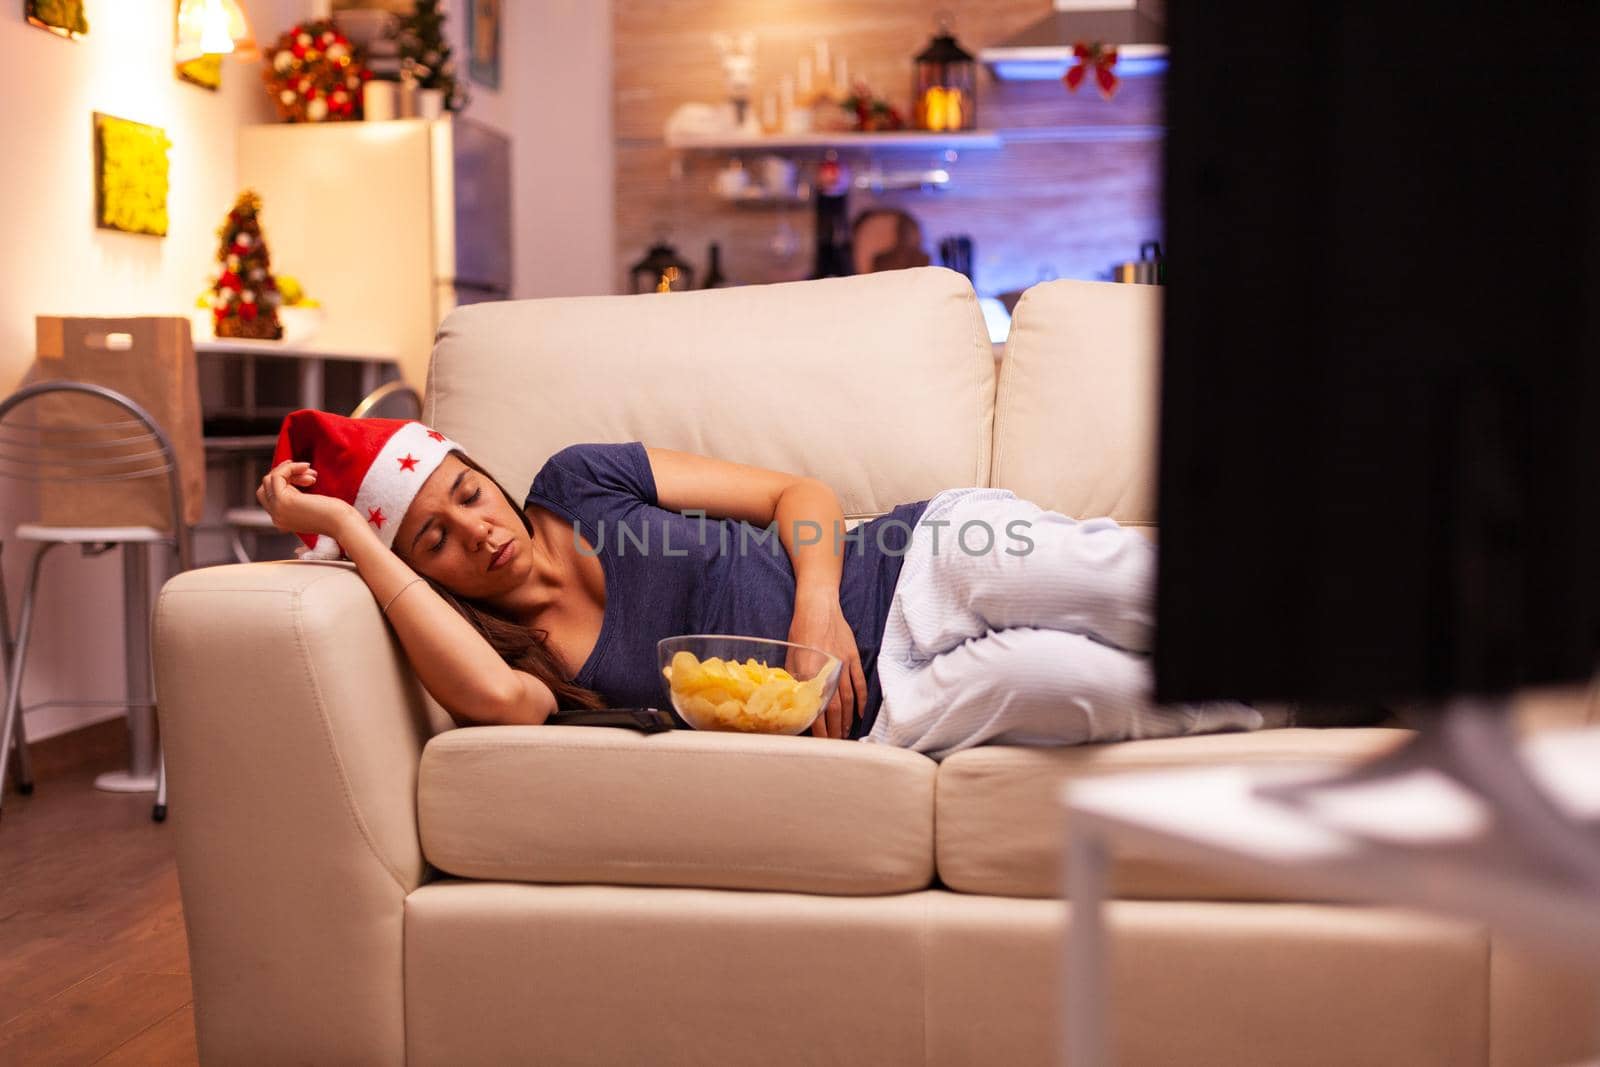 Girl falling asleep on sofa in xmas decorated kitchen by DCStudio